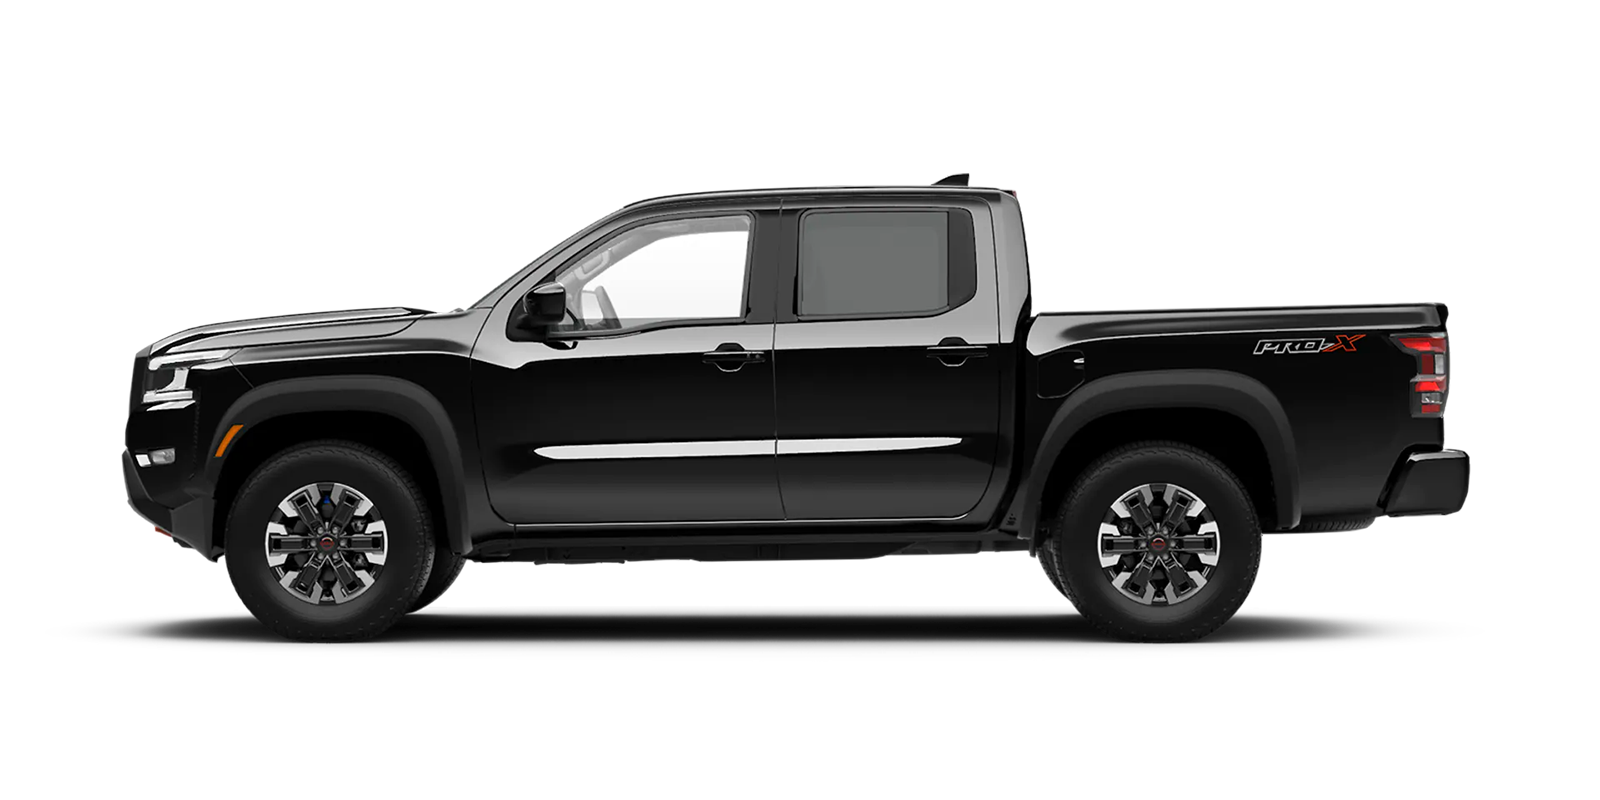 2022 Frontier Crew Cab Pro-X 4x2 in Super Black | Courtesy Nissan PA in Altoona PA